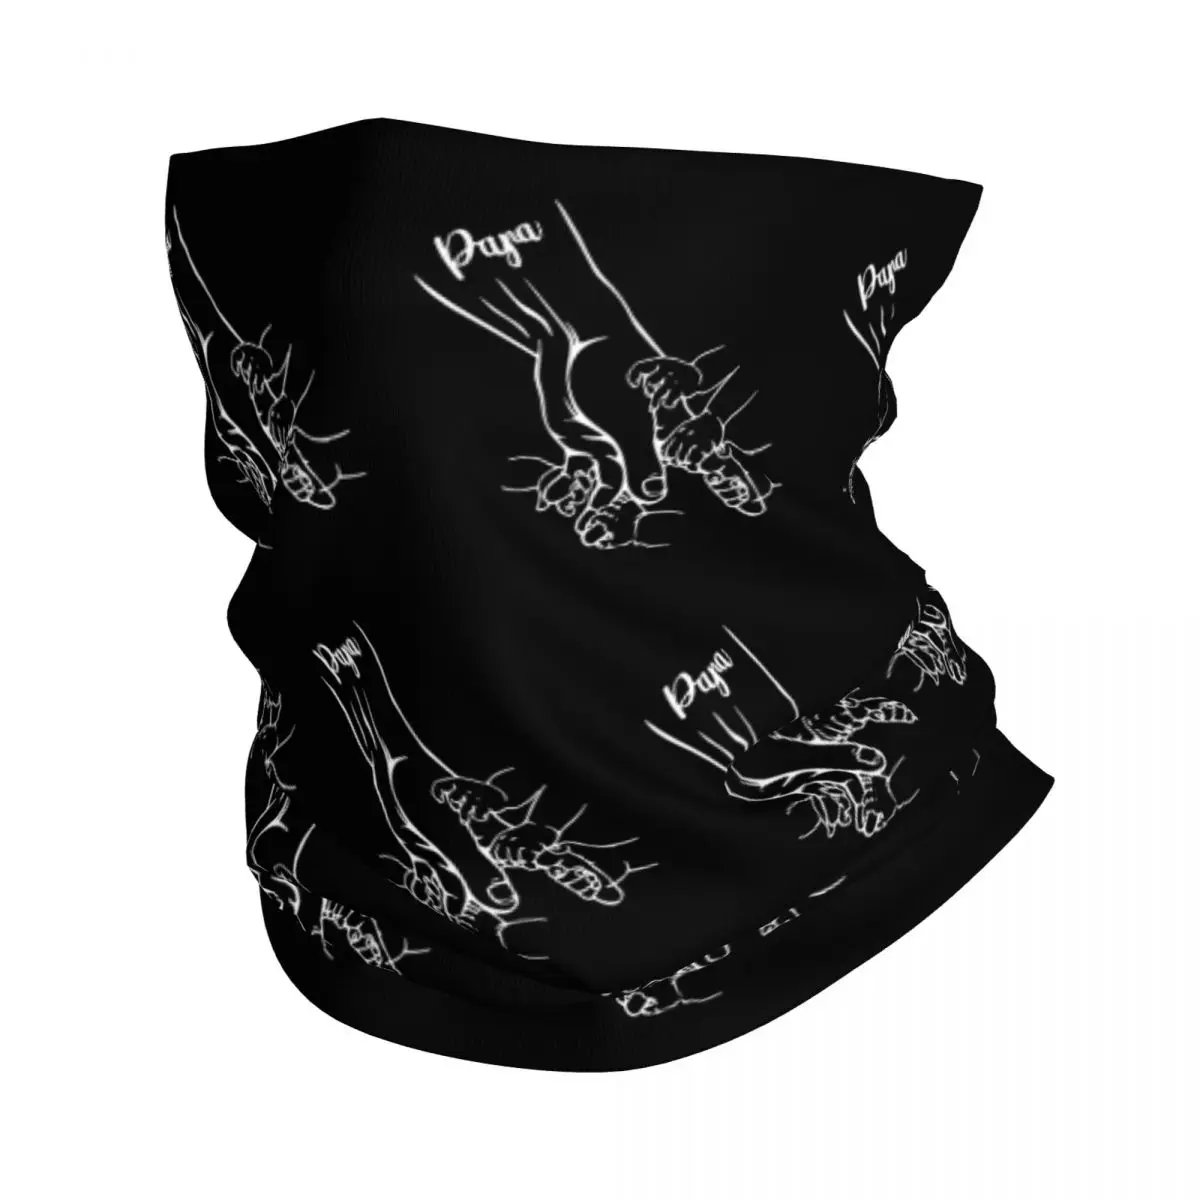 Fathers Day Bandana Neck Cover Printed Hand Drawn Daddy Child Fist Bump Wrap Scarf Warm Cycling Scarf Cycling Unisex Adult